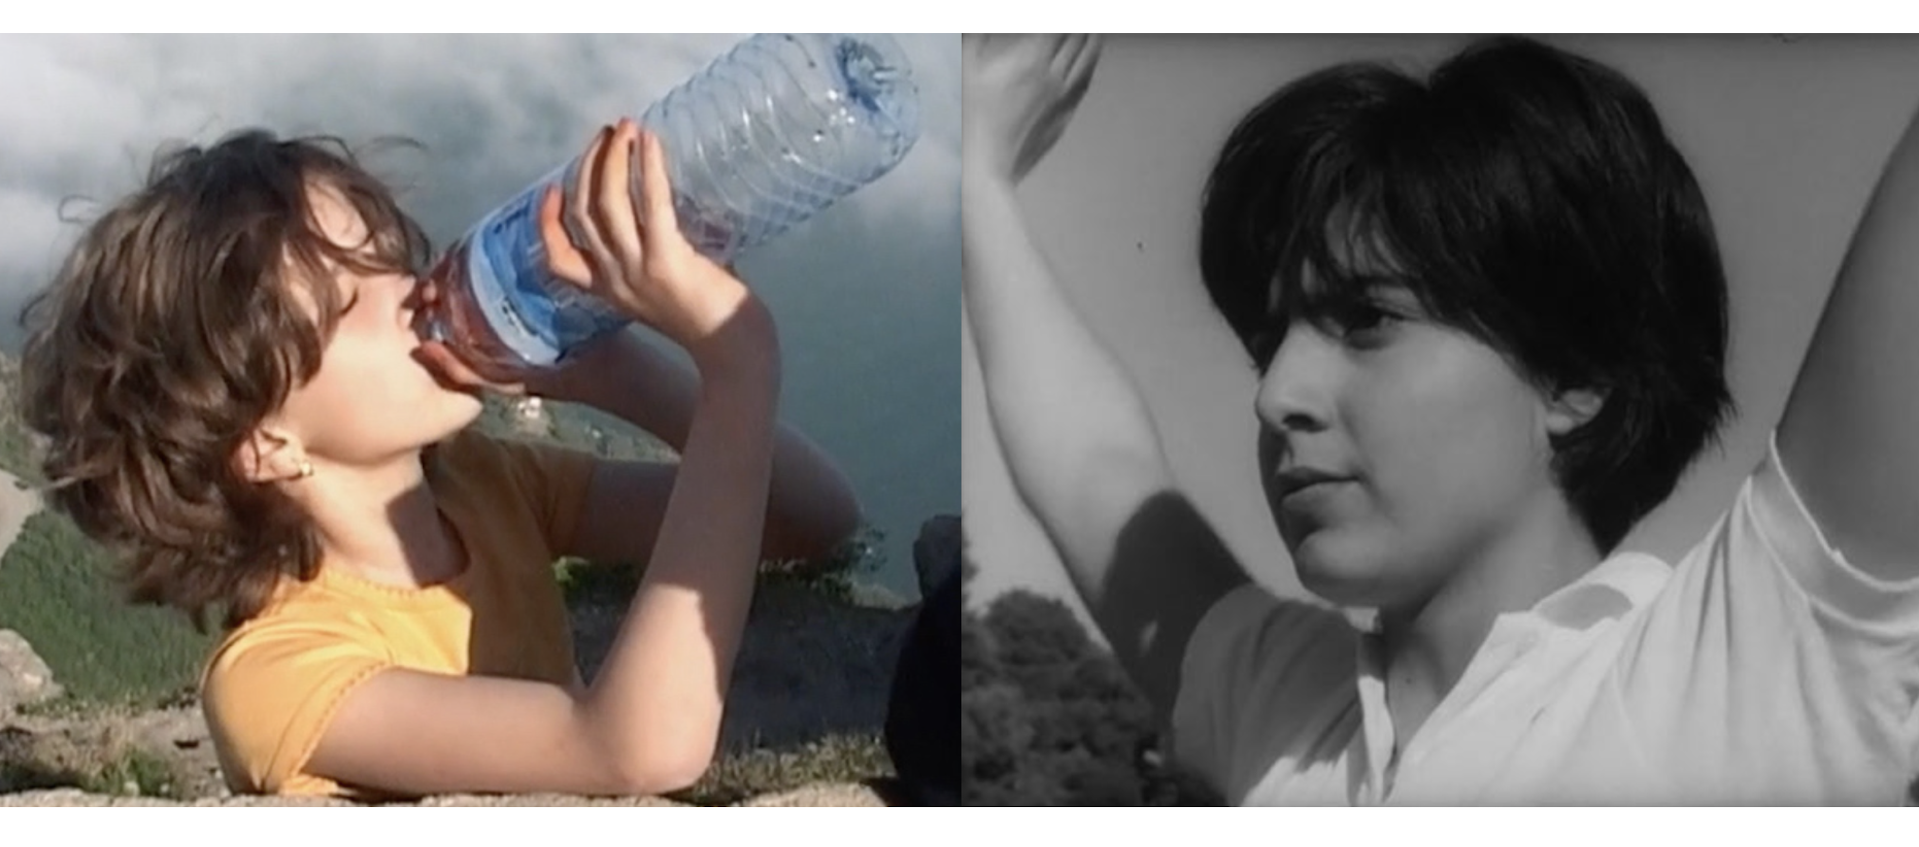 Side-by-side images of individual young women from the respective documentaries Lettre à Ma Soeur and Elle